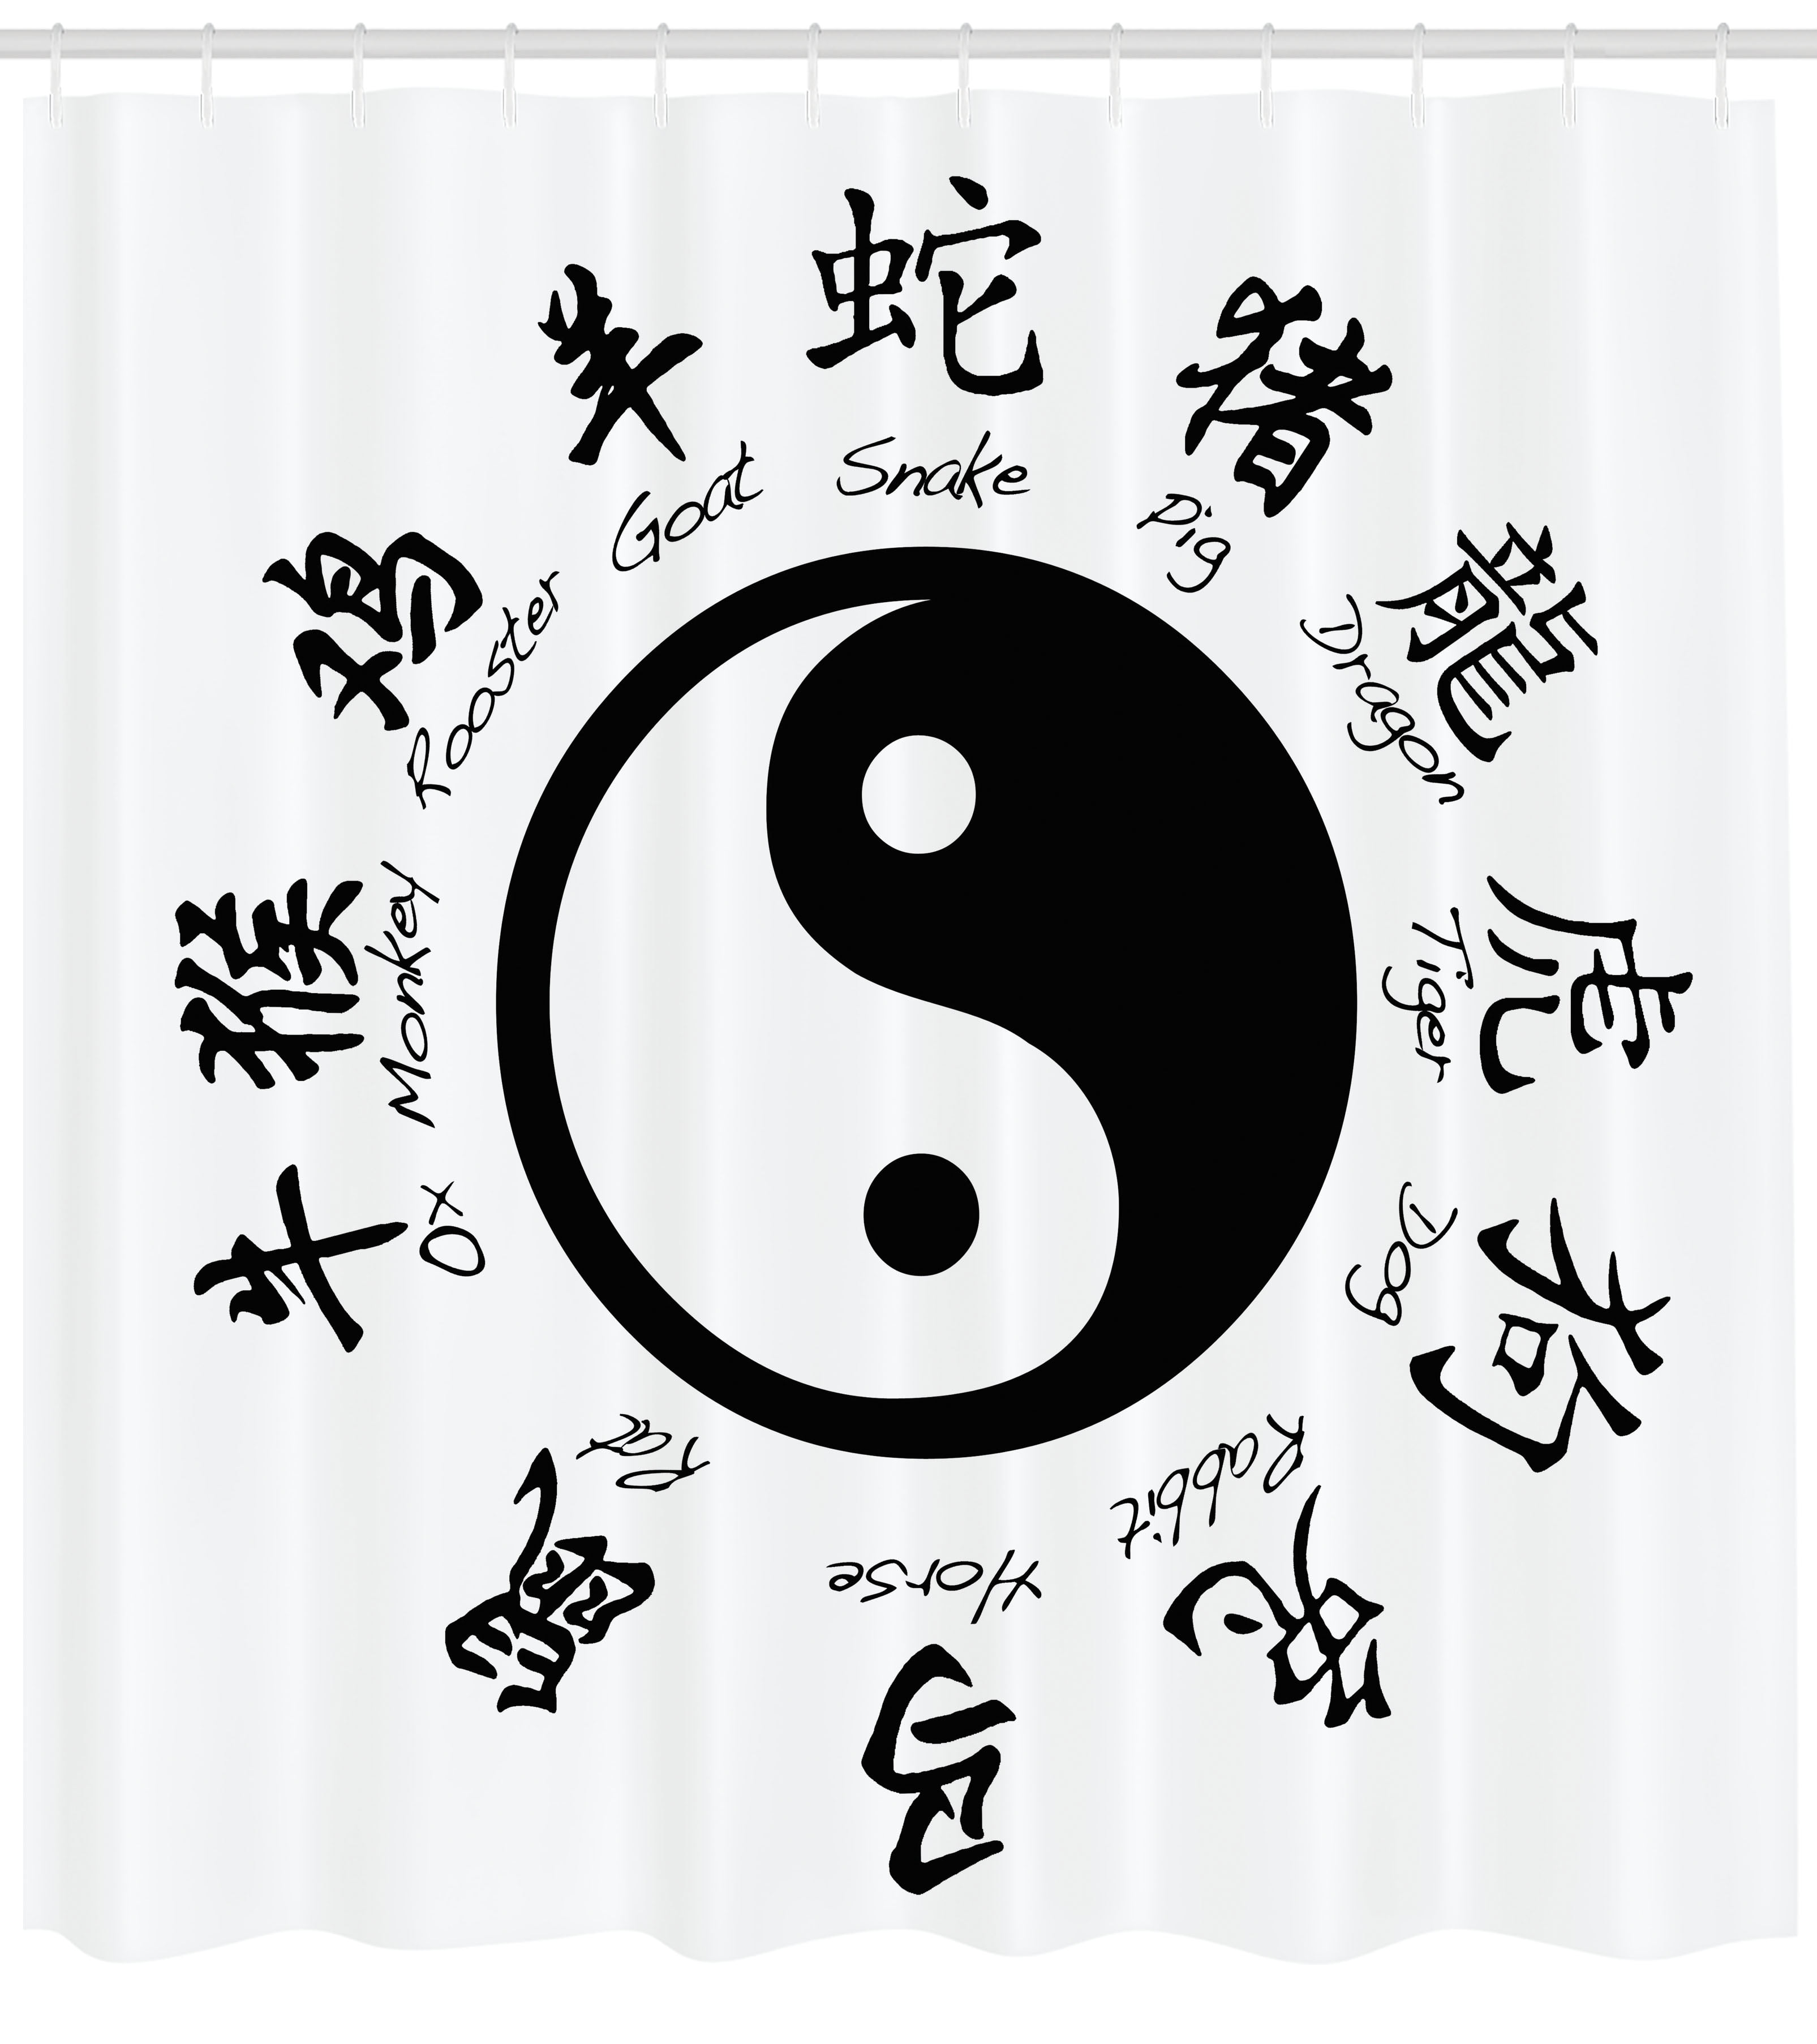 what other name of the yin and yang symbol